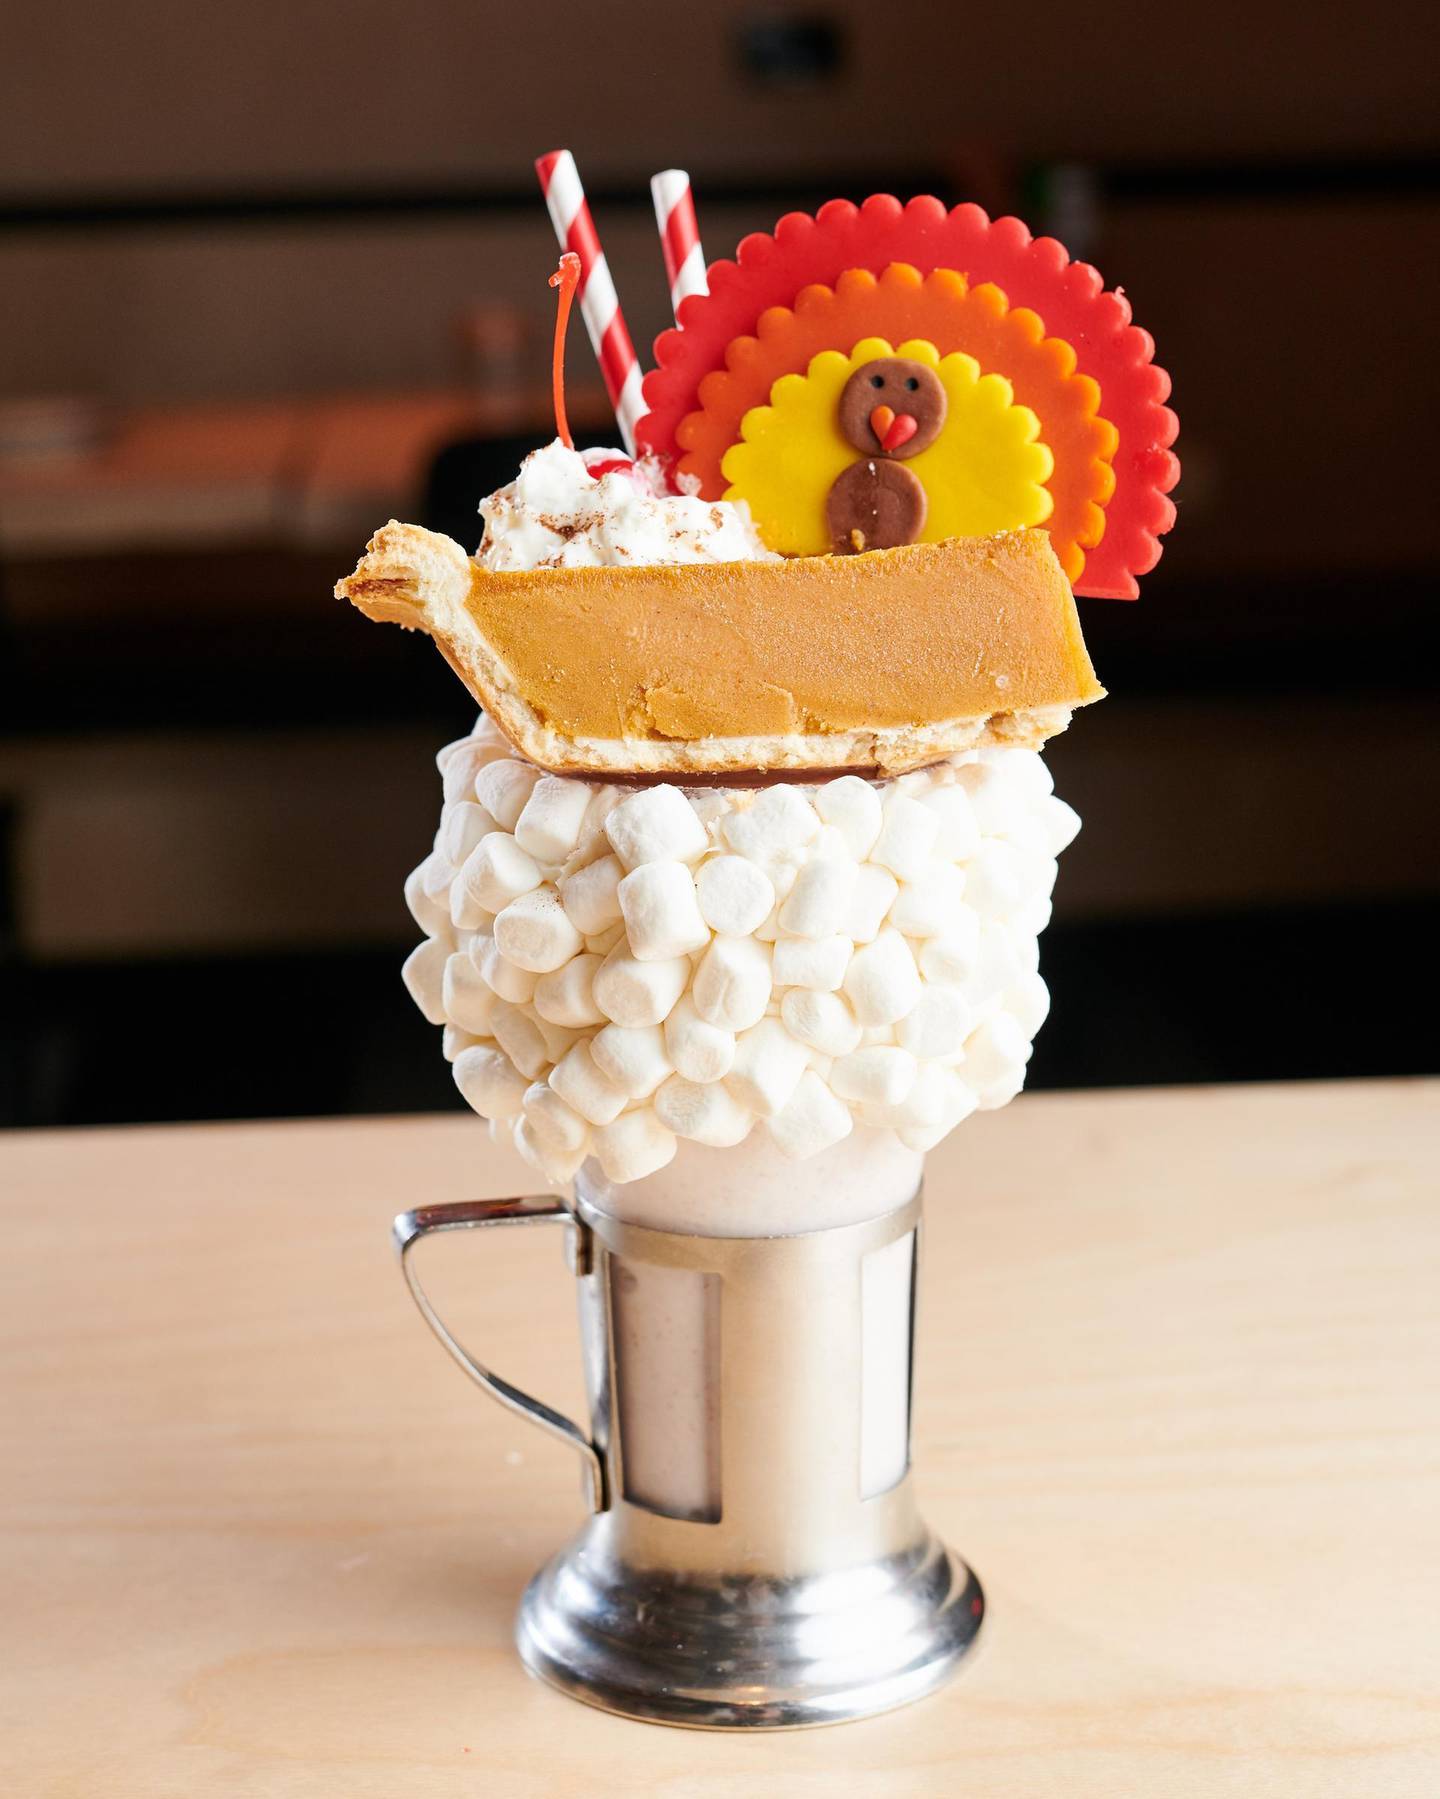 Black Tap's Pumpkin Pie CrazyShake will return for a limited time in November.